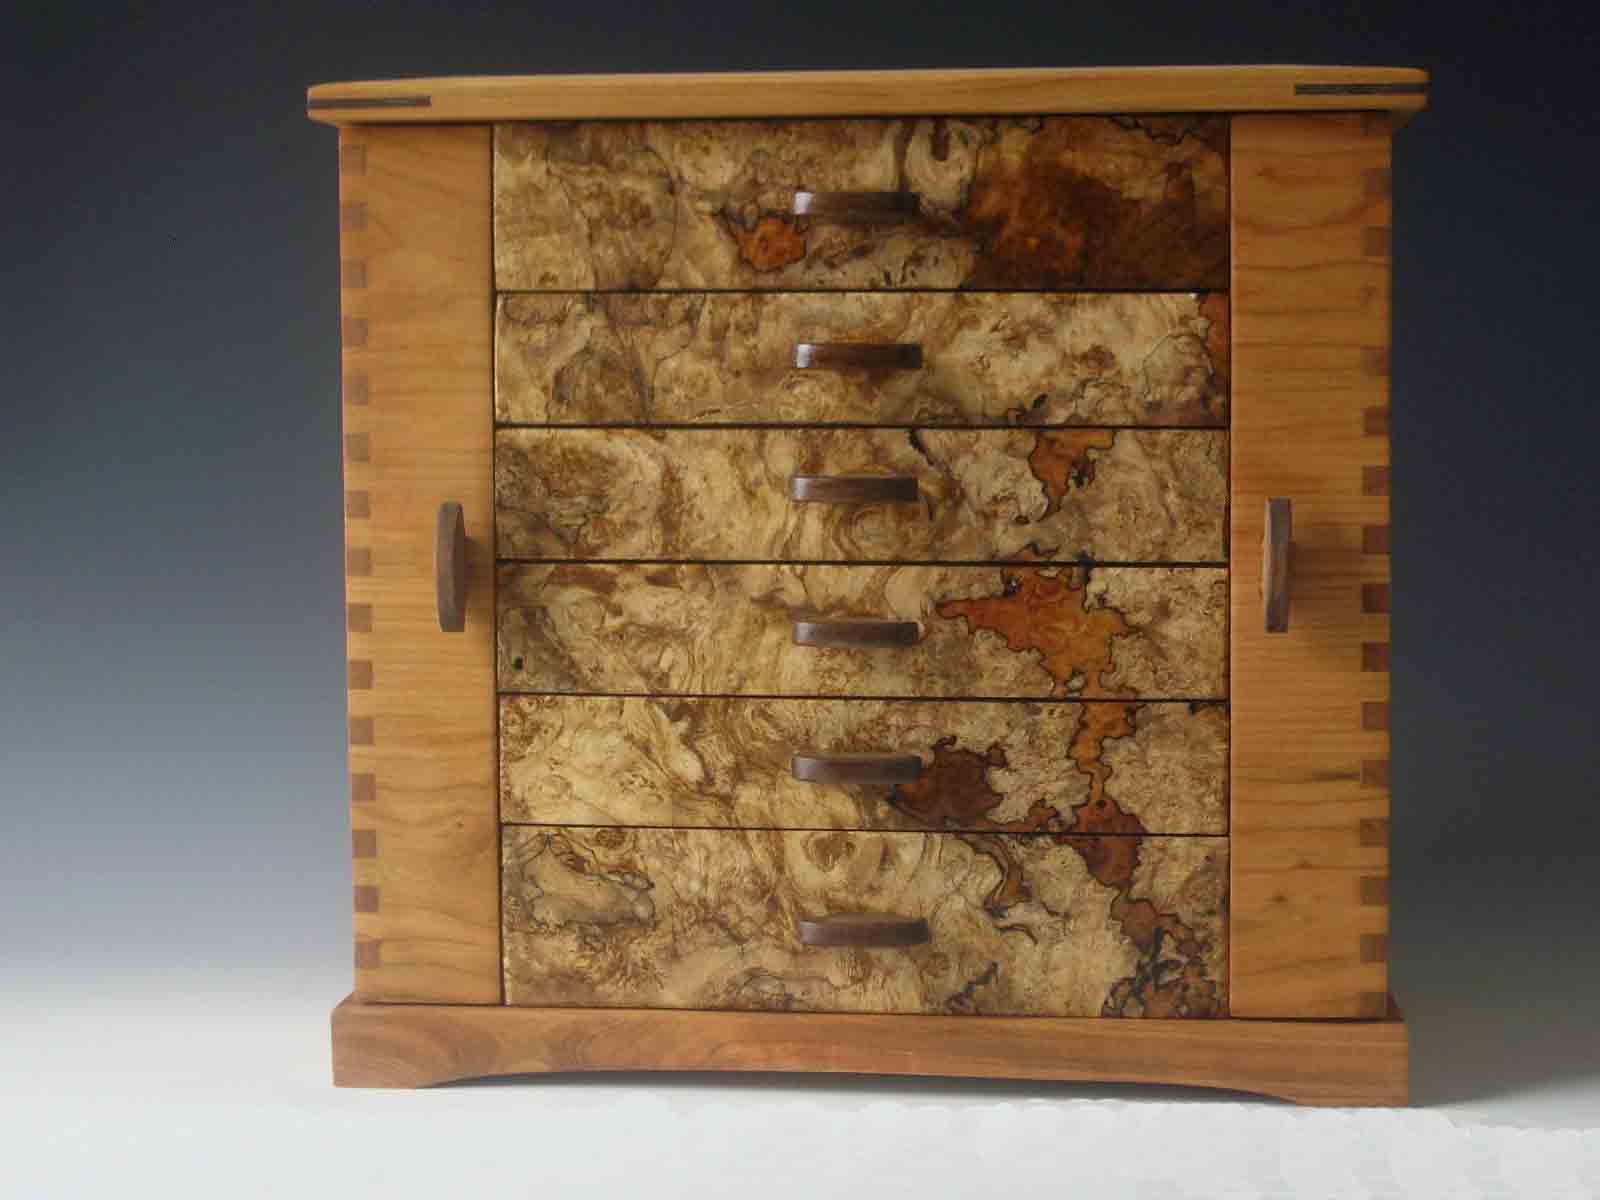 Handmade standing jewelry box made of cherry wood and burl; with two side doors and six drawers